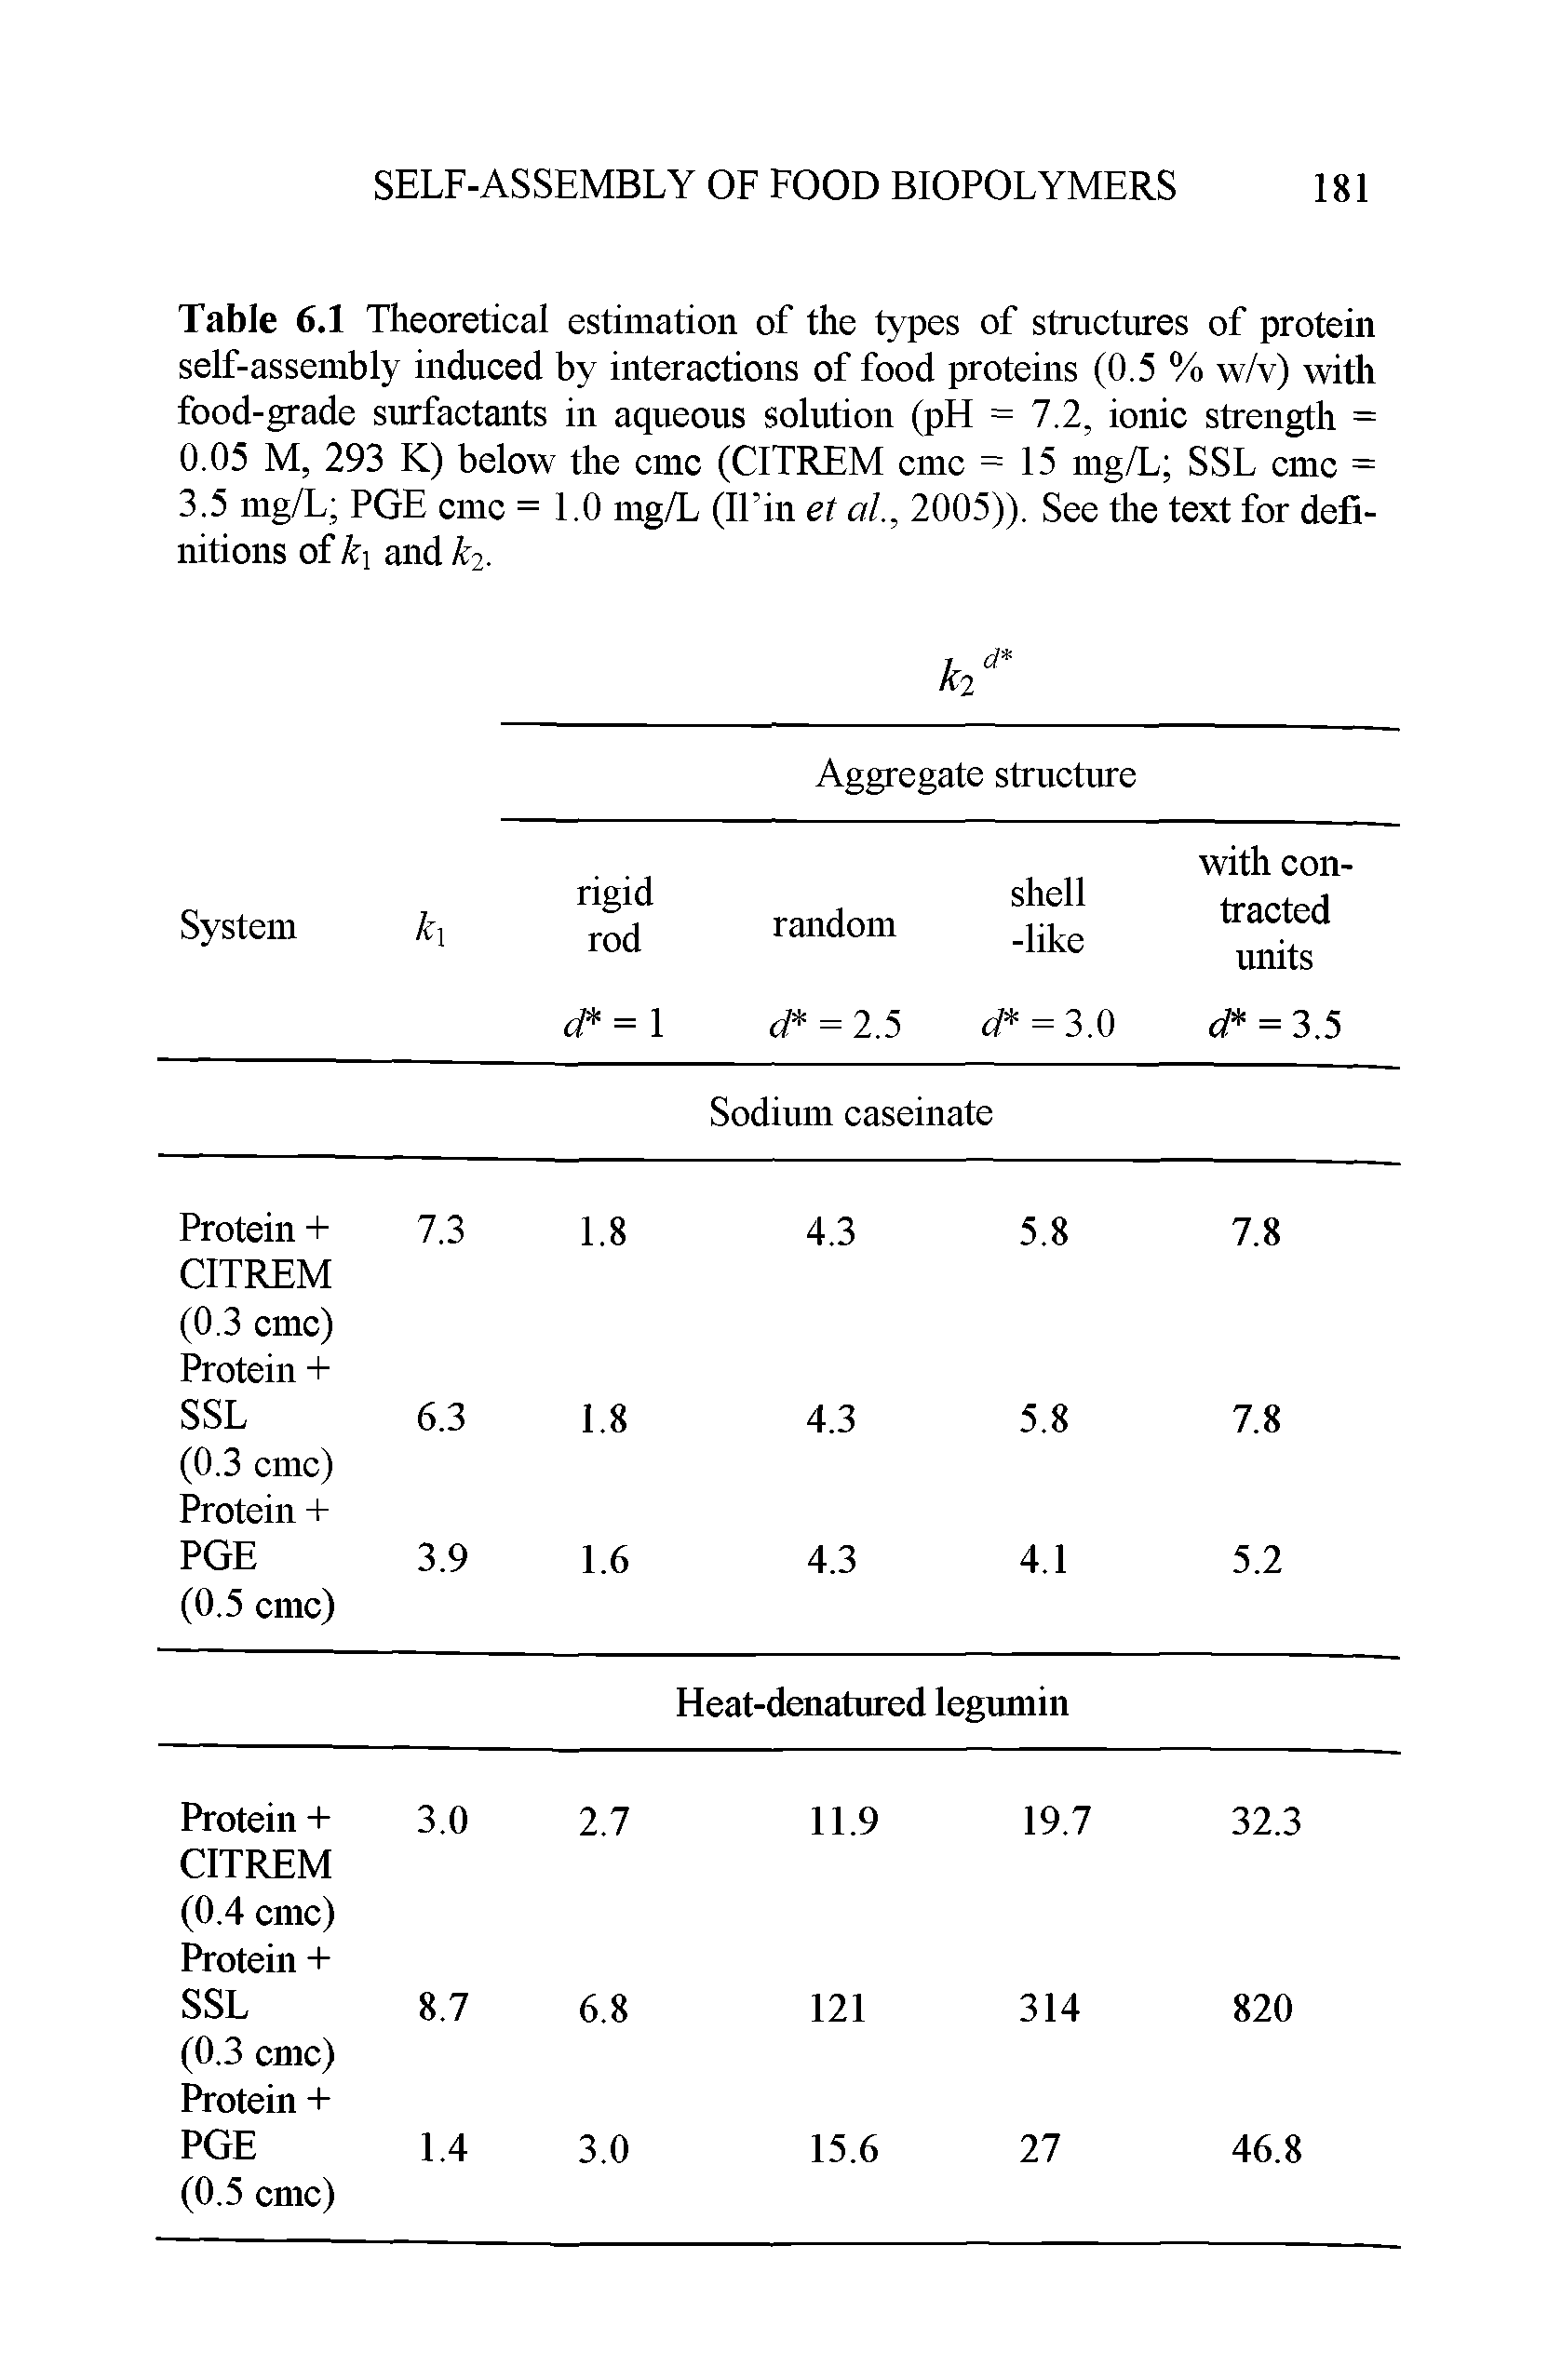 Table 6.1 Theoretical estimation of the types of structures of protein self-assembly induced by interactions of food proteins (0.5 % w/v) with food-grade surfactants in aqueous solution (pH = 7.2, ionic strength = 0.05 M, 293 K) below the cmc (CITREM cmc = 15 mg/L SSL cmc = 3.5 mg/L PGE cmc = 1.0 mg/L (IFin el al., 2005)). See the text for definitions of k and k2.